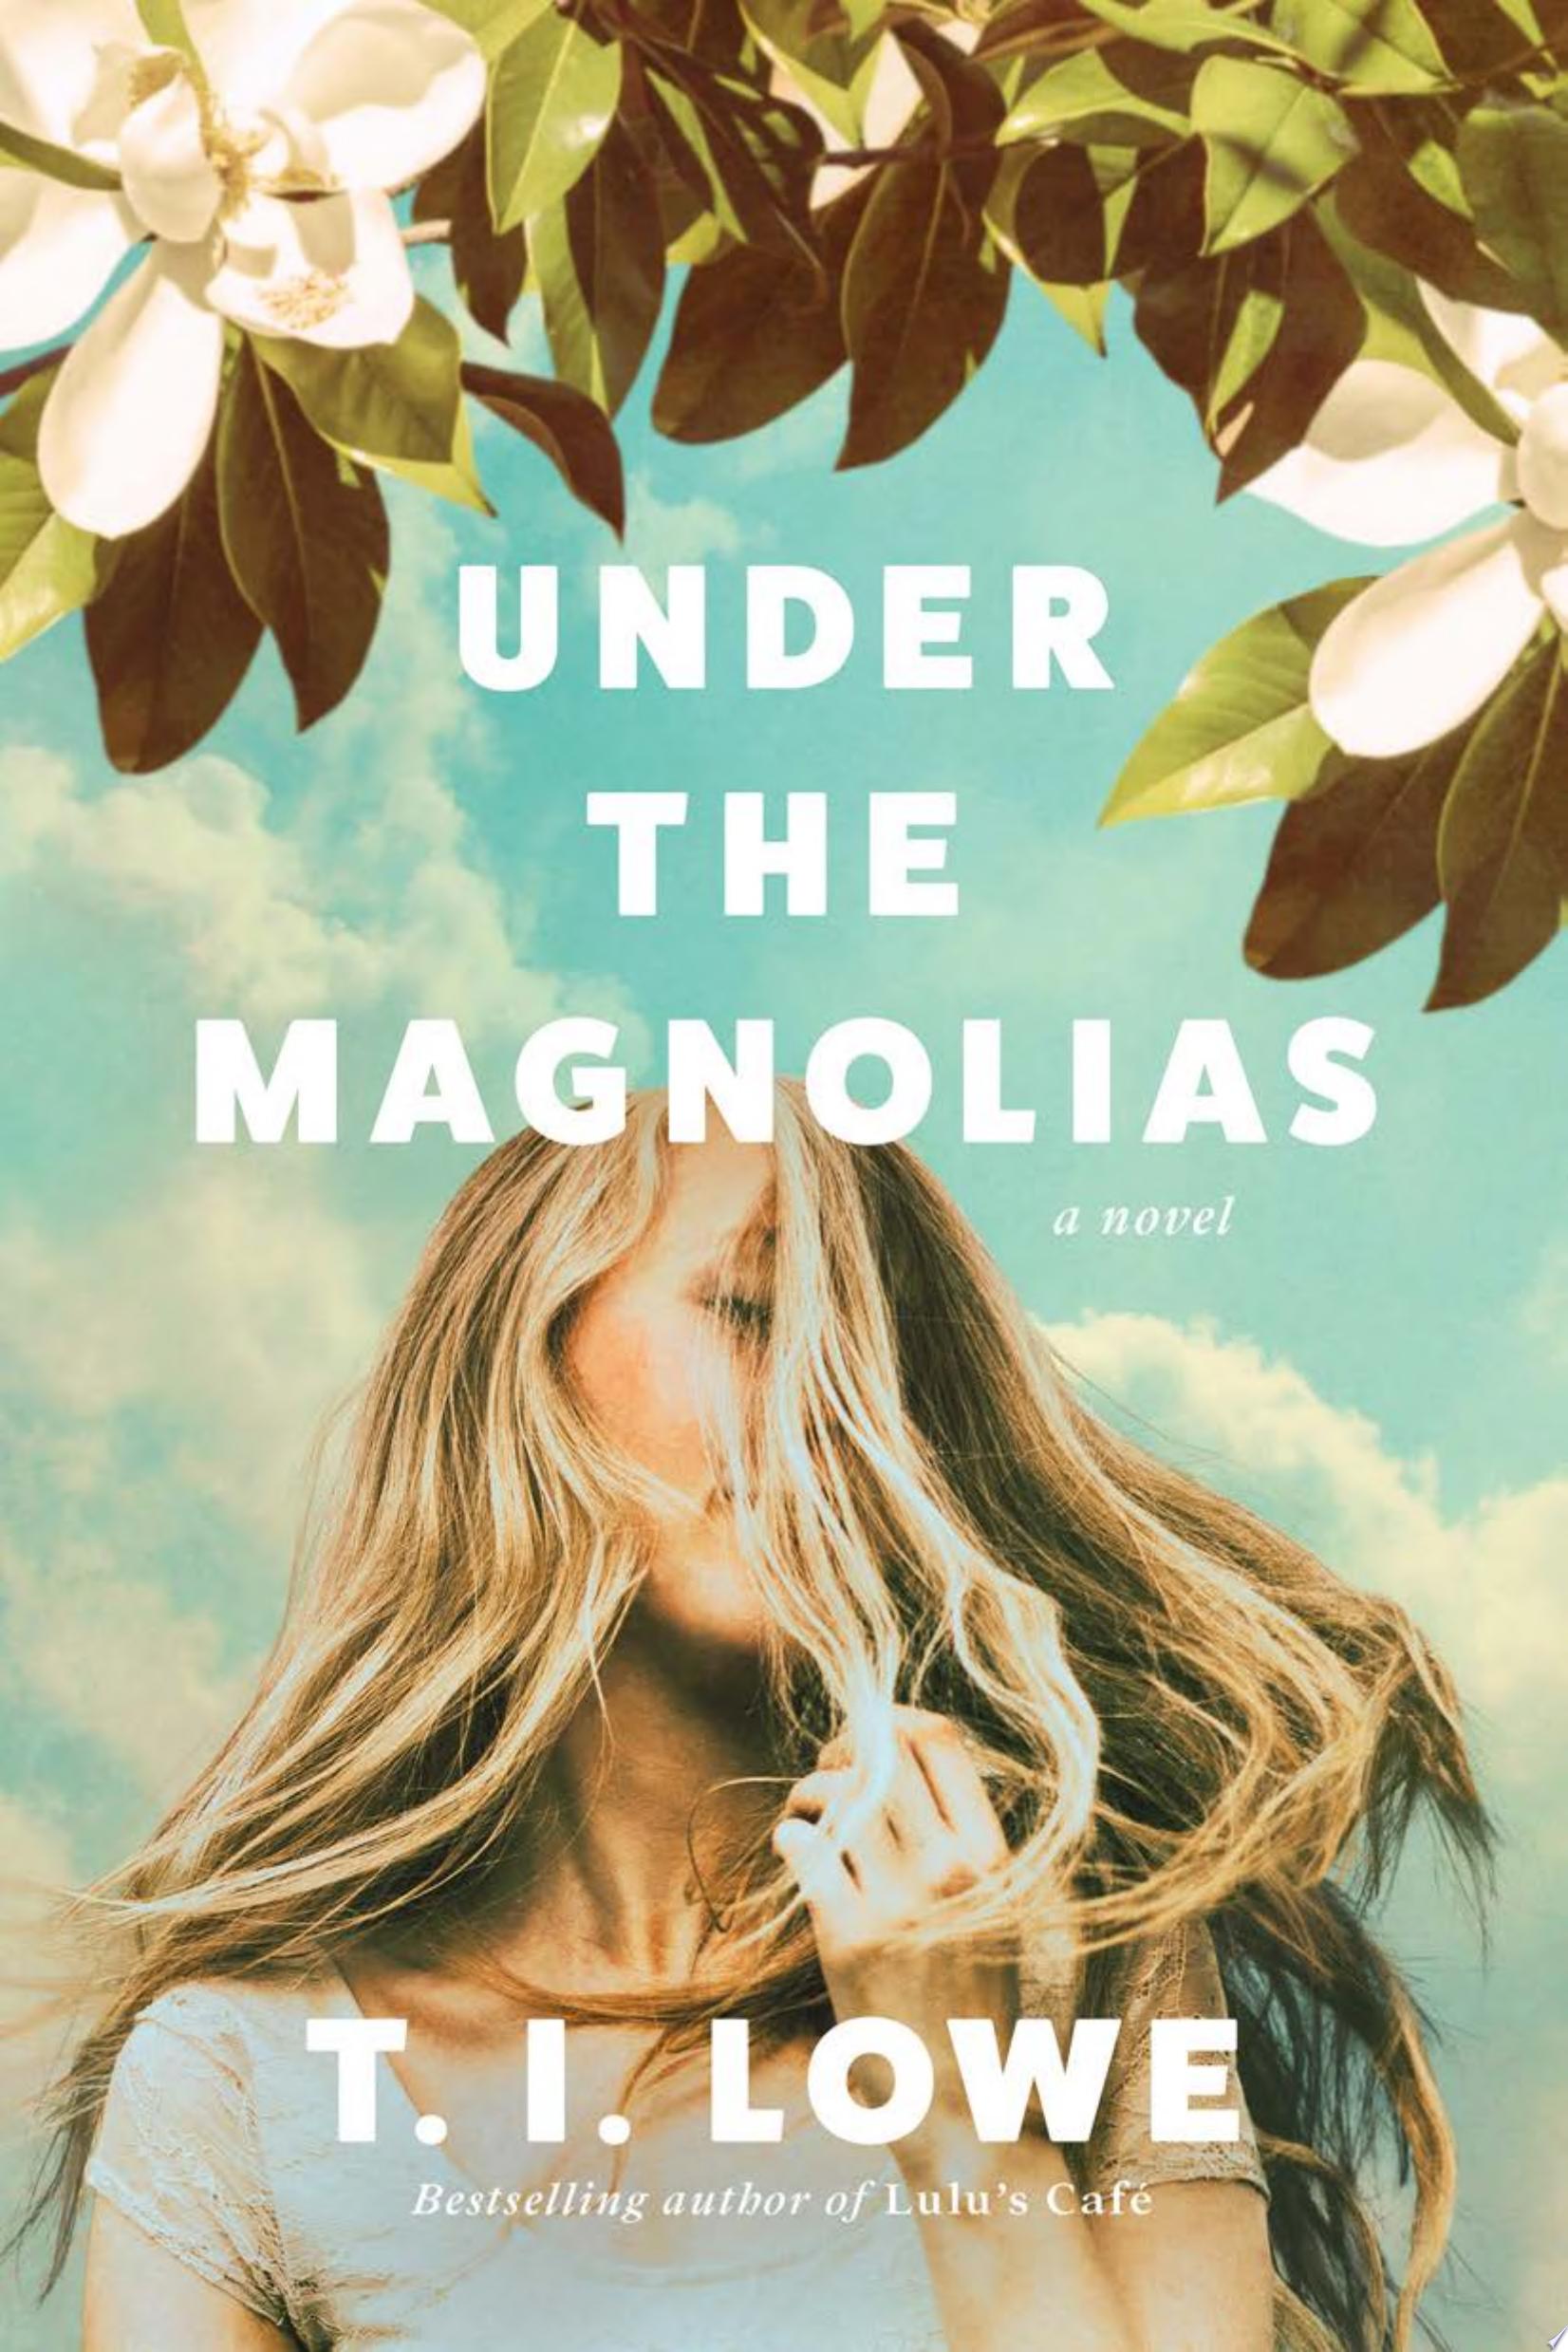 Image for "Under the Magnolias"